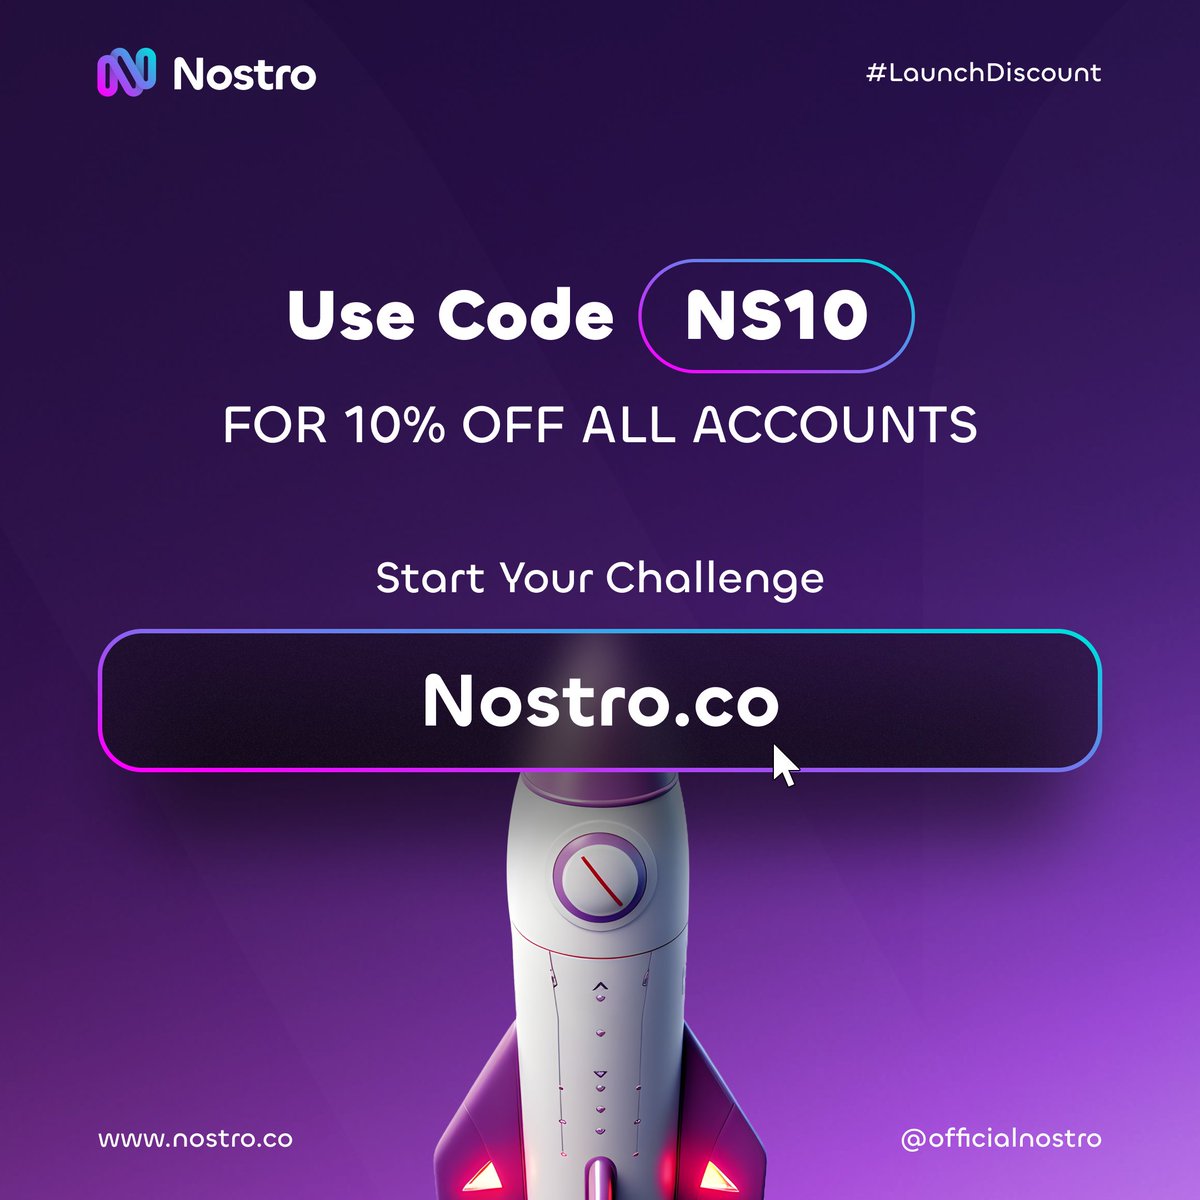 Get ready to elevate your trading game with our special launch offer! 

Use code NS10 at checkout for a 10% discount on all challenges paid via Stripe, including Visa, Mastercard, Amex, and more. 

Start your challenge at:👉 nostro.co 👈

Don't miss out on this